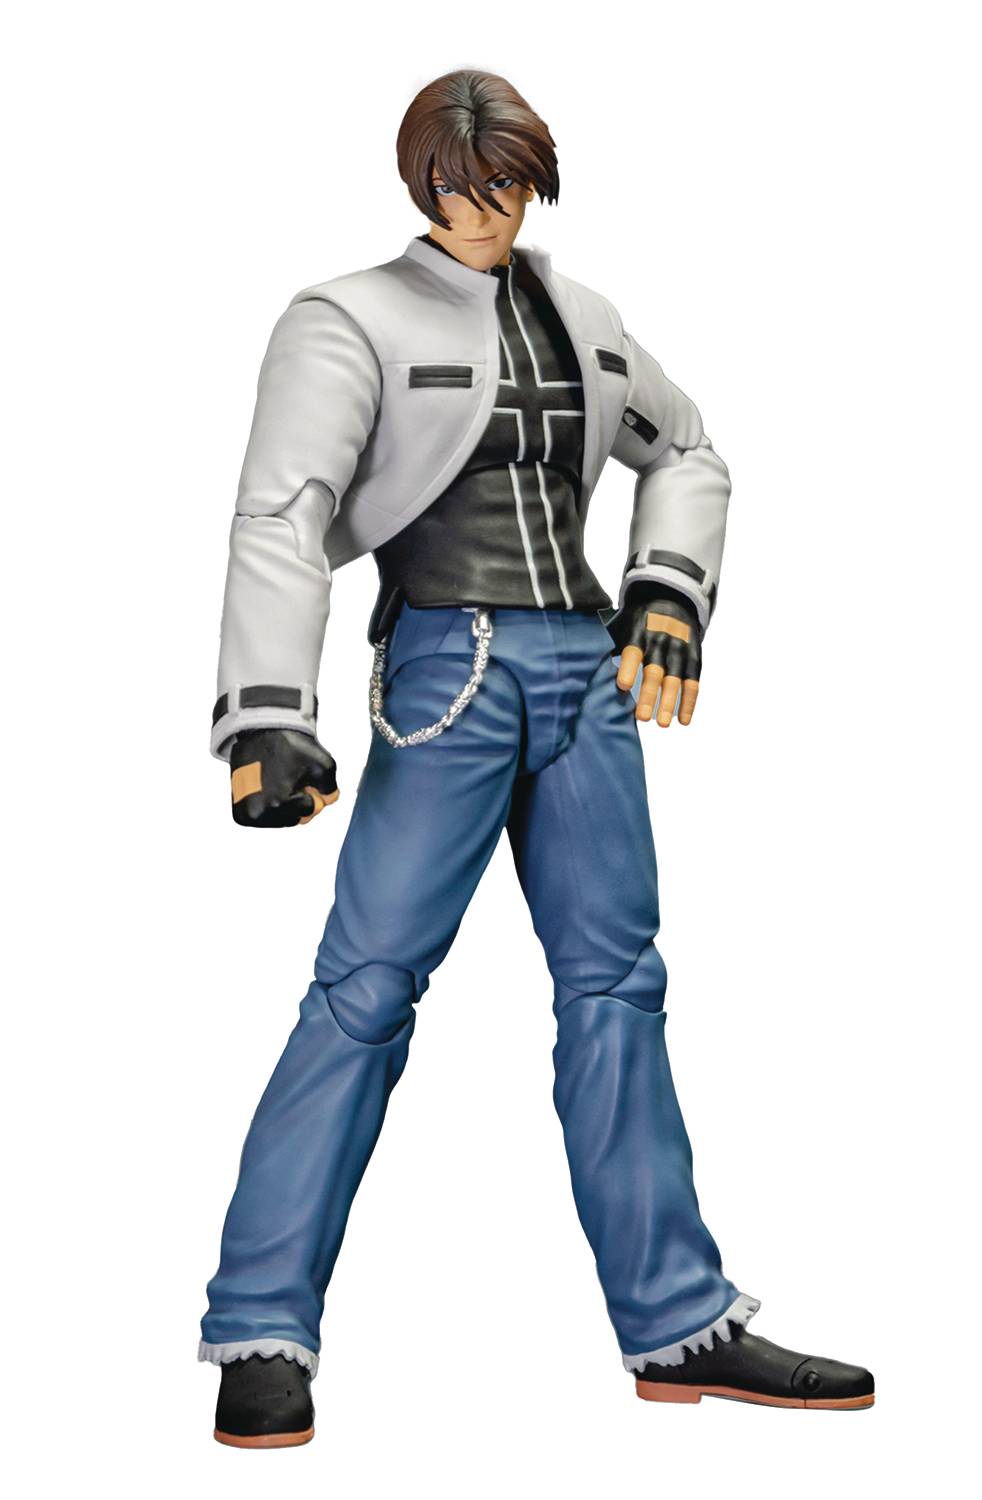 KYO KUSANAGI - King of Fighters 2002 Unlimited Match – Storm Collectibles